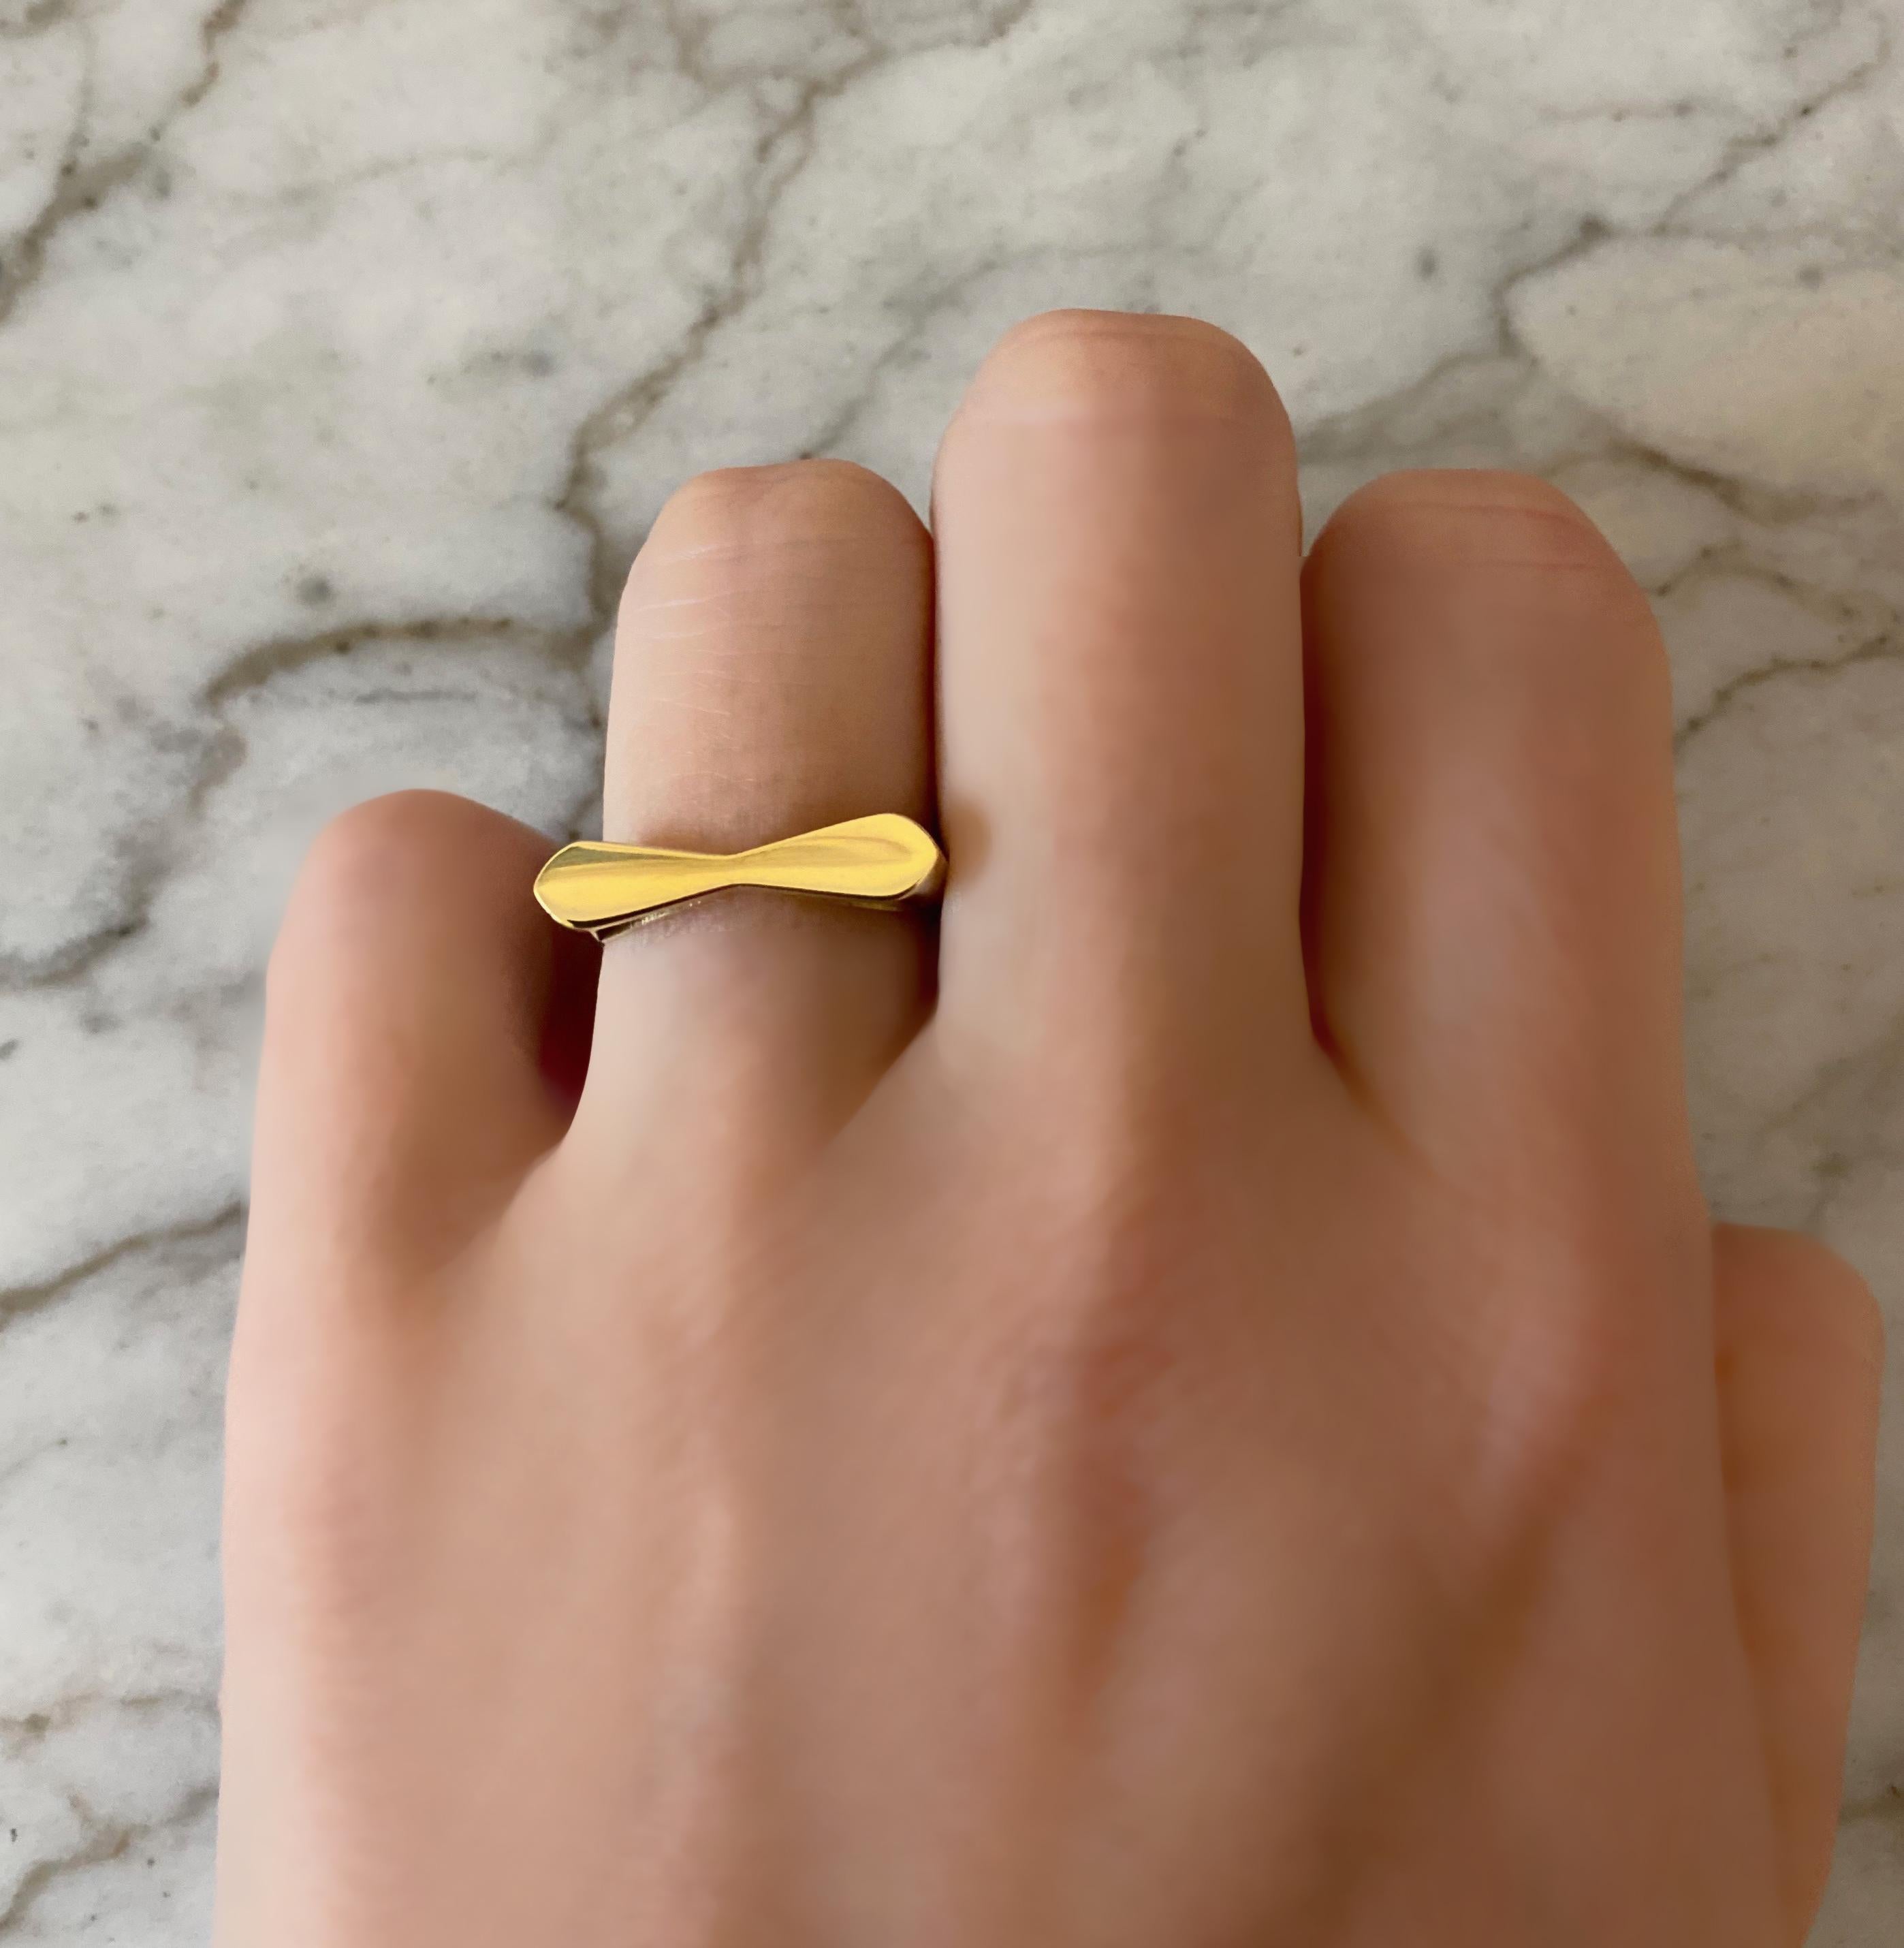 Comfy ring to combine with their Bracelet. Inspired by the figure of a tie. 

•	Available yellow gold in size 53 (EU) 6,6 (US), 16,8 mm
•	The size can be altered to fit

•	18 Karat Recycled Yellow Gold 
•	Weight: approx. 4 gr gold
•	Hand-made in